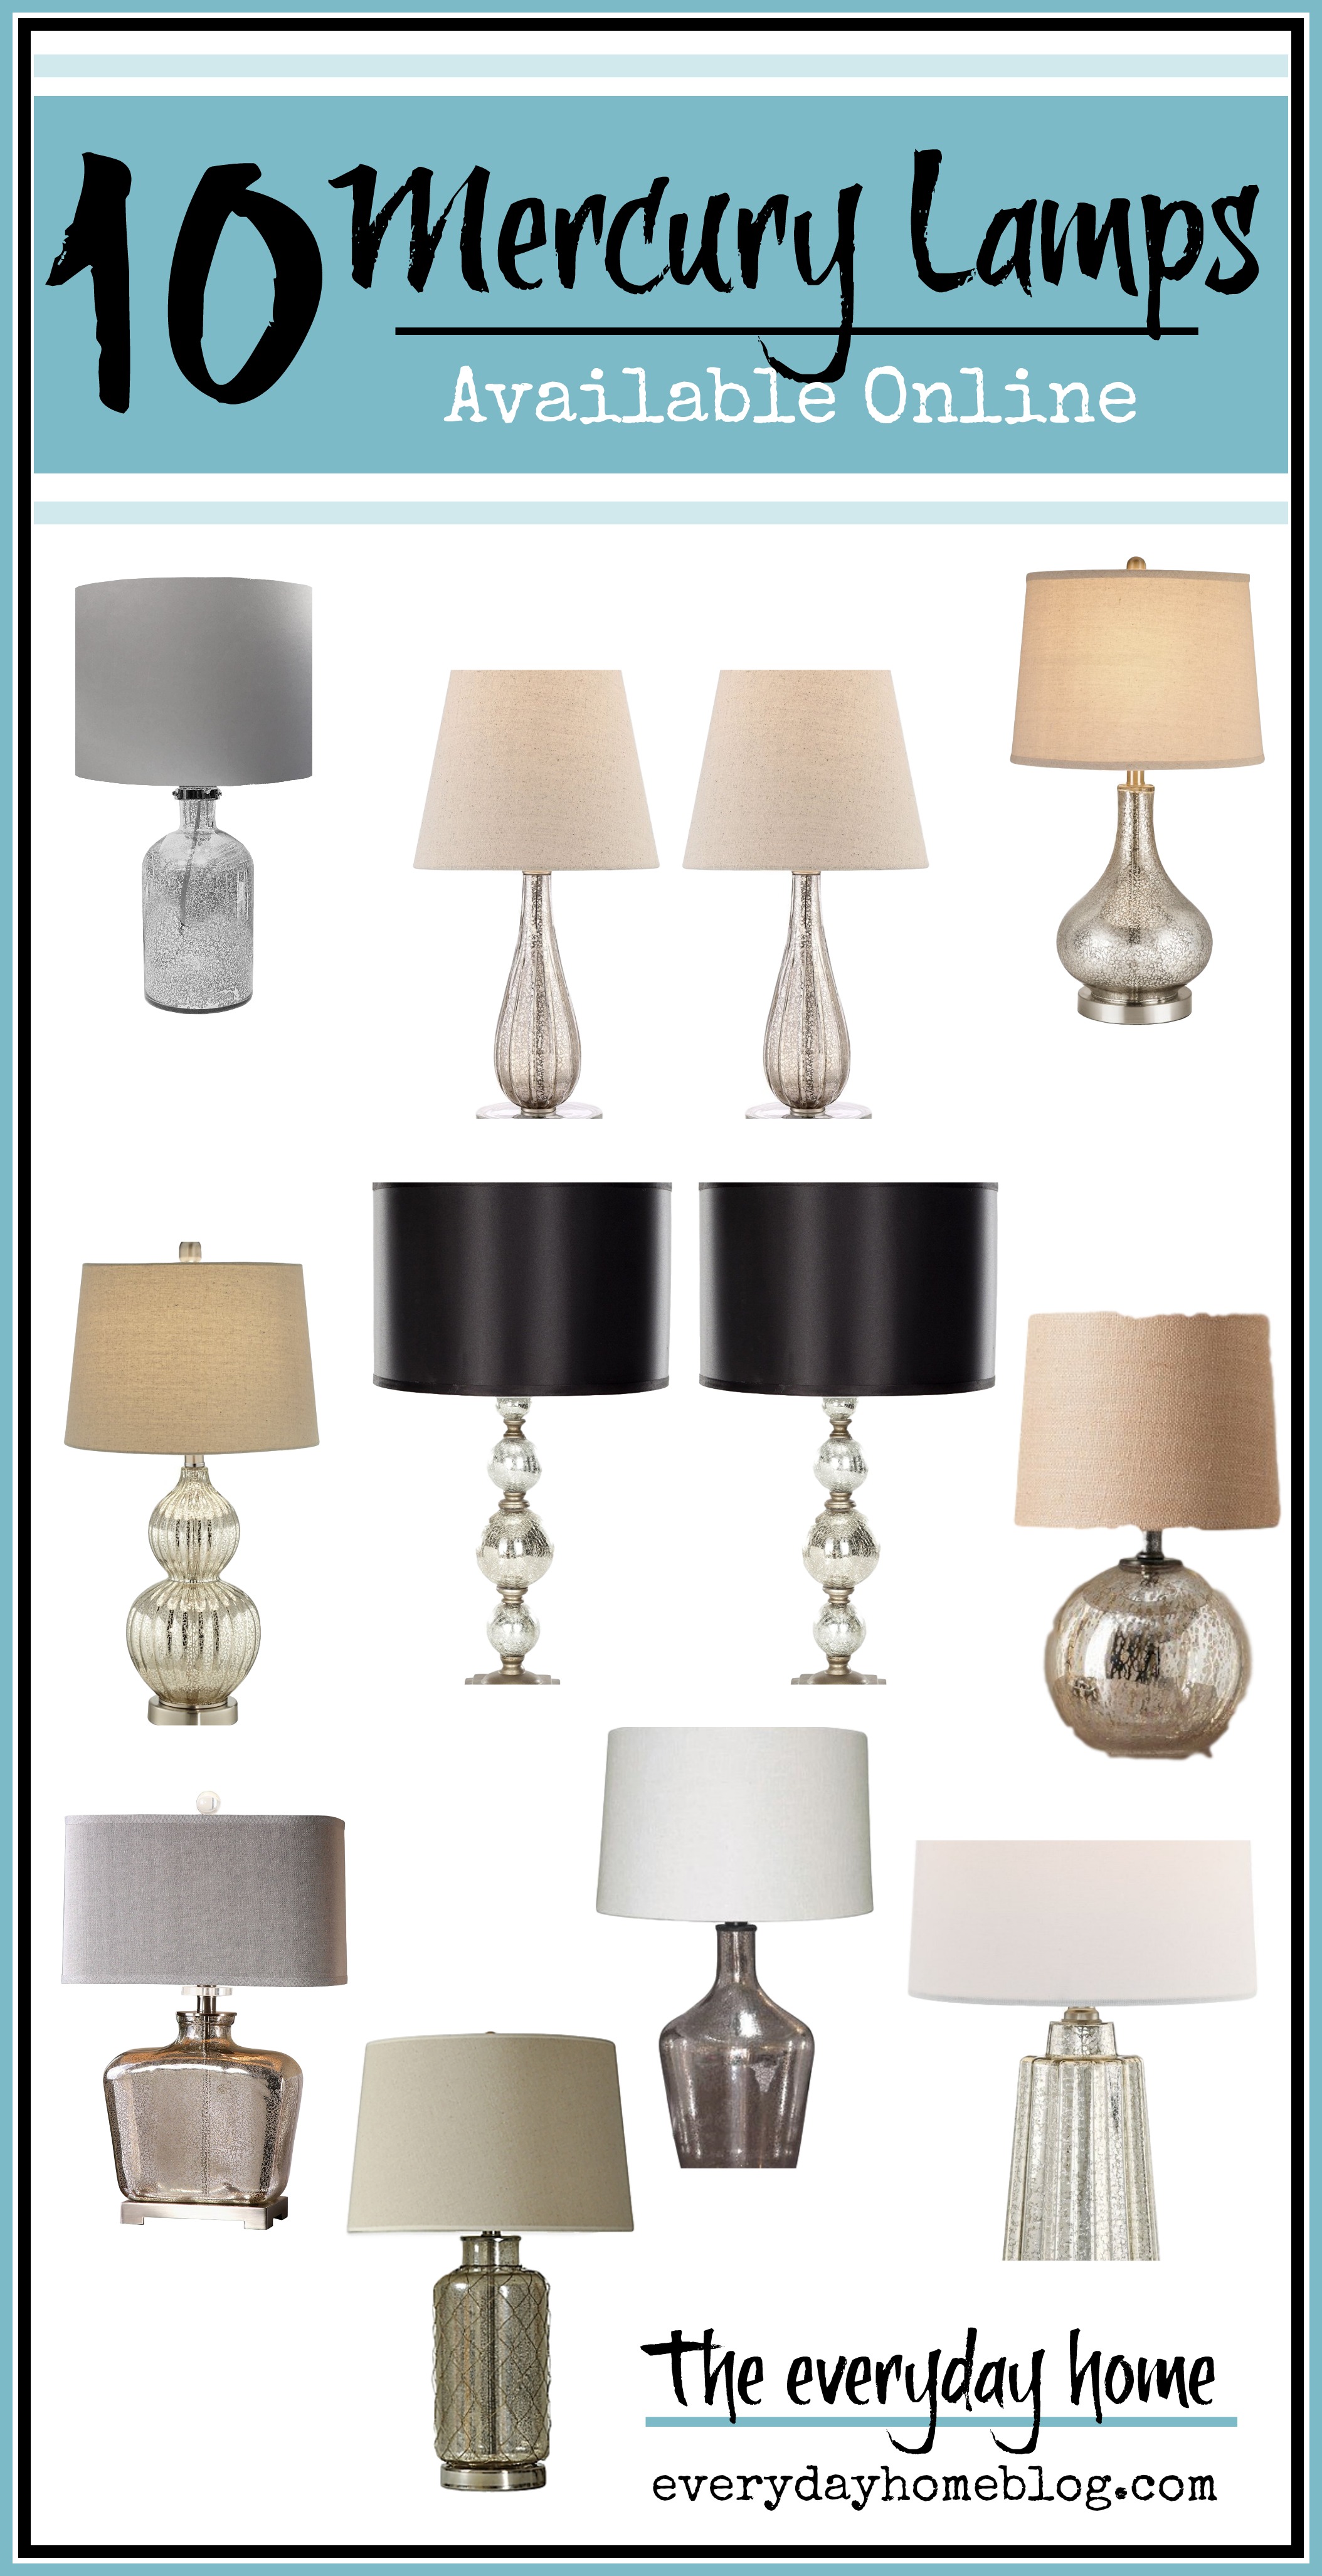 10 Amazing Mercury Lamps Available Online | Shopping Guide | The Everyday Home | www.everydayhomeblog.com